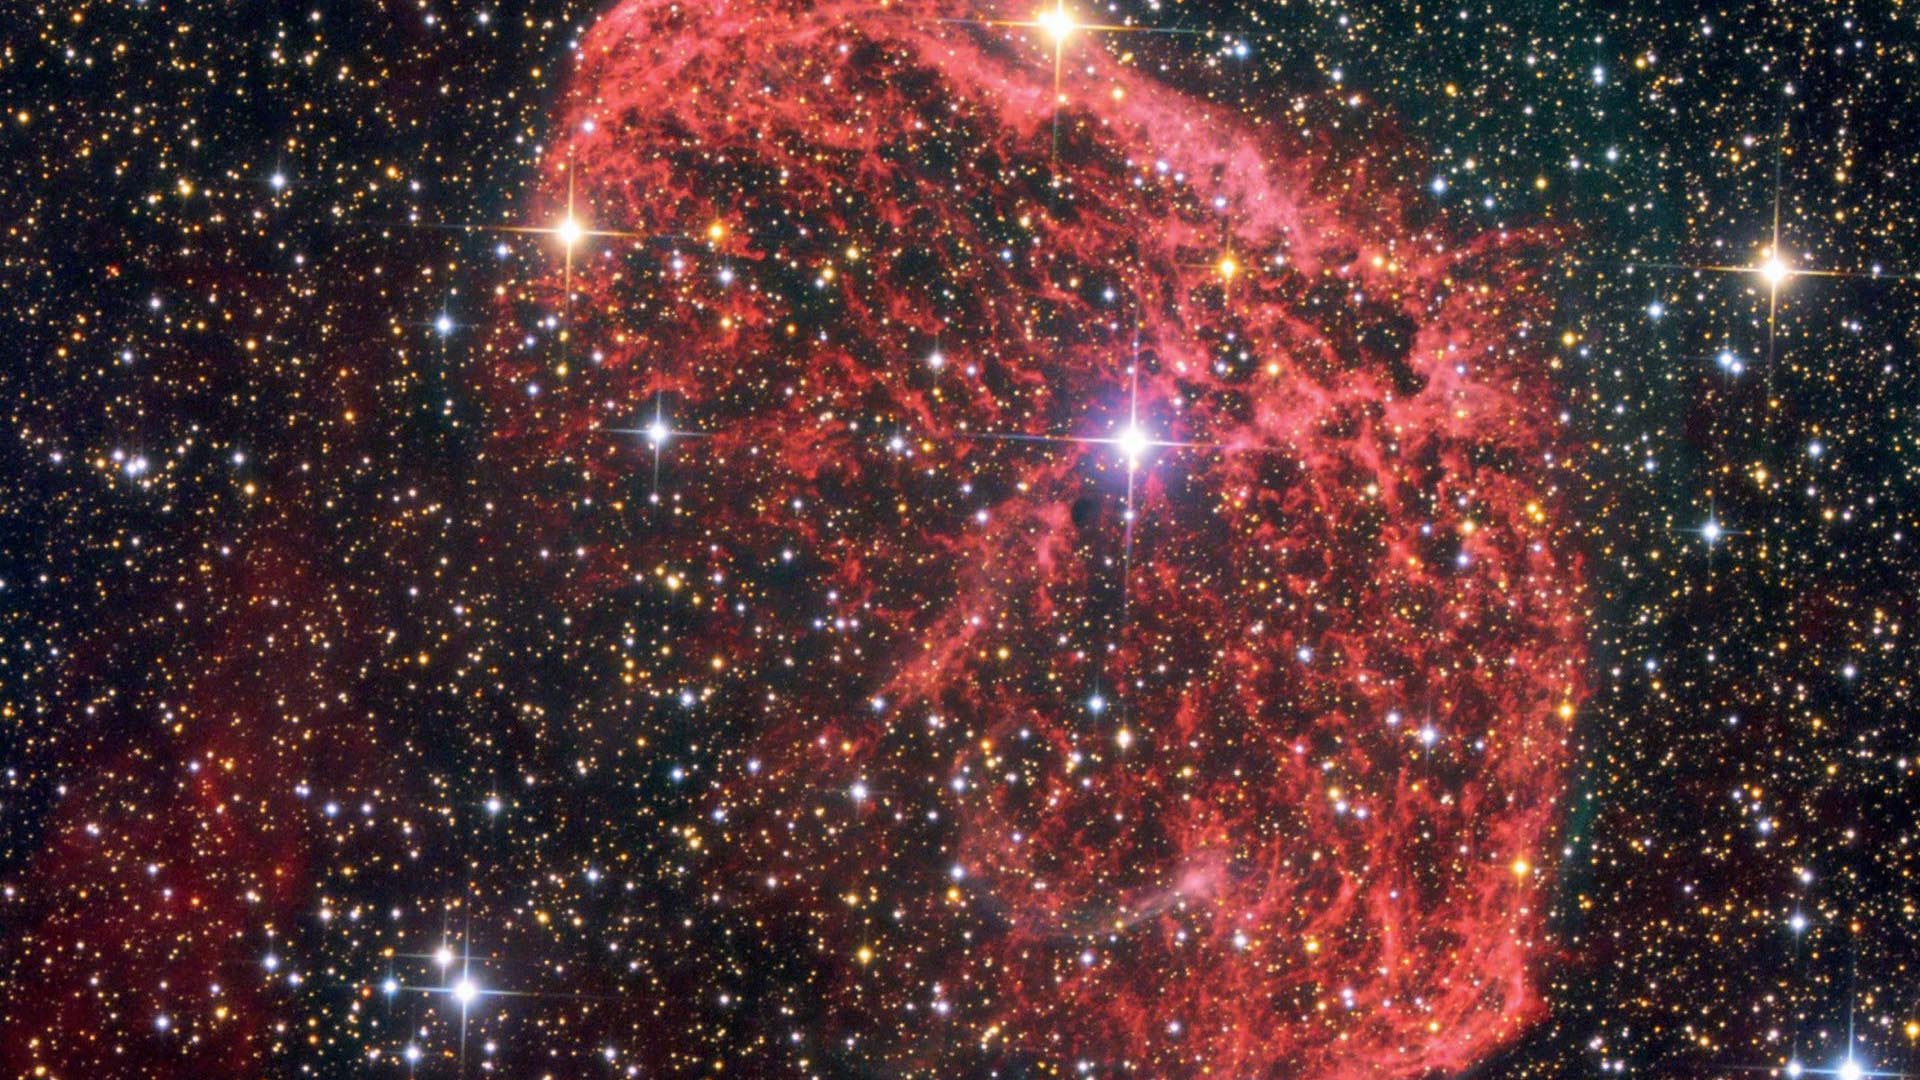 The fine filament structure of NGC 6888 is visible on long-exposure images. Jochen Borgert